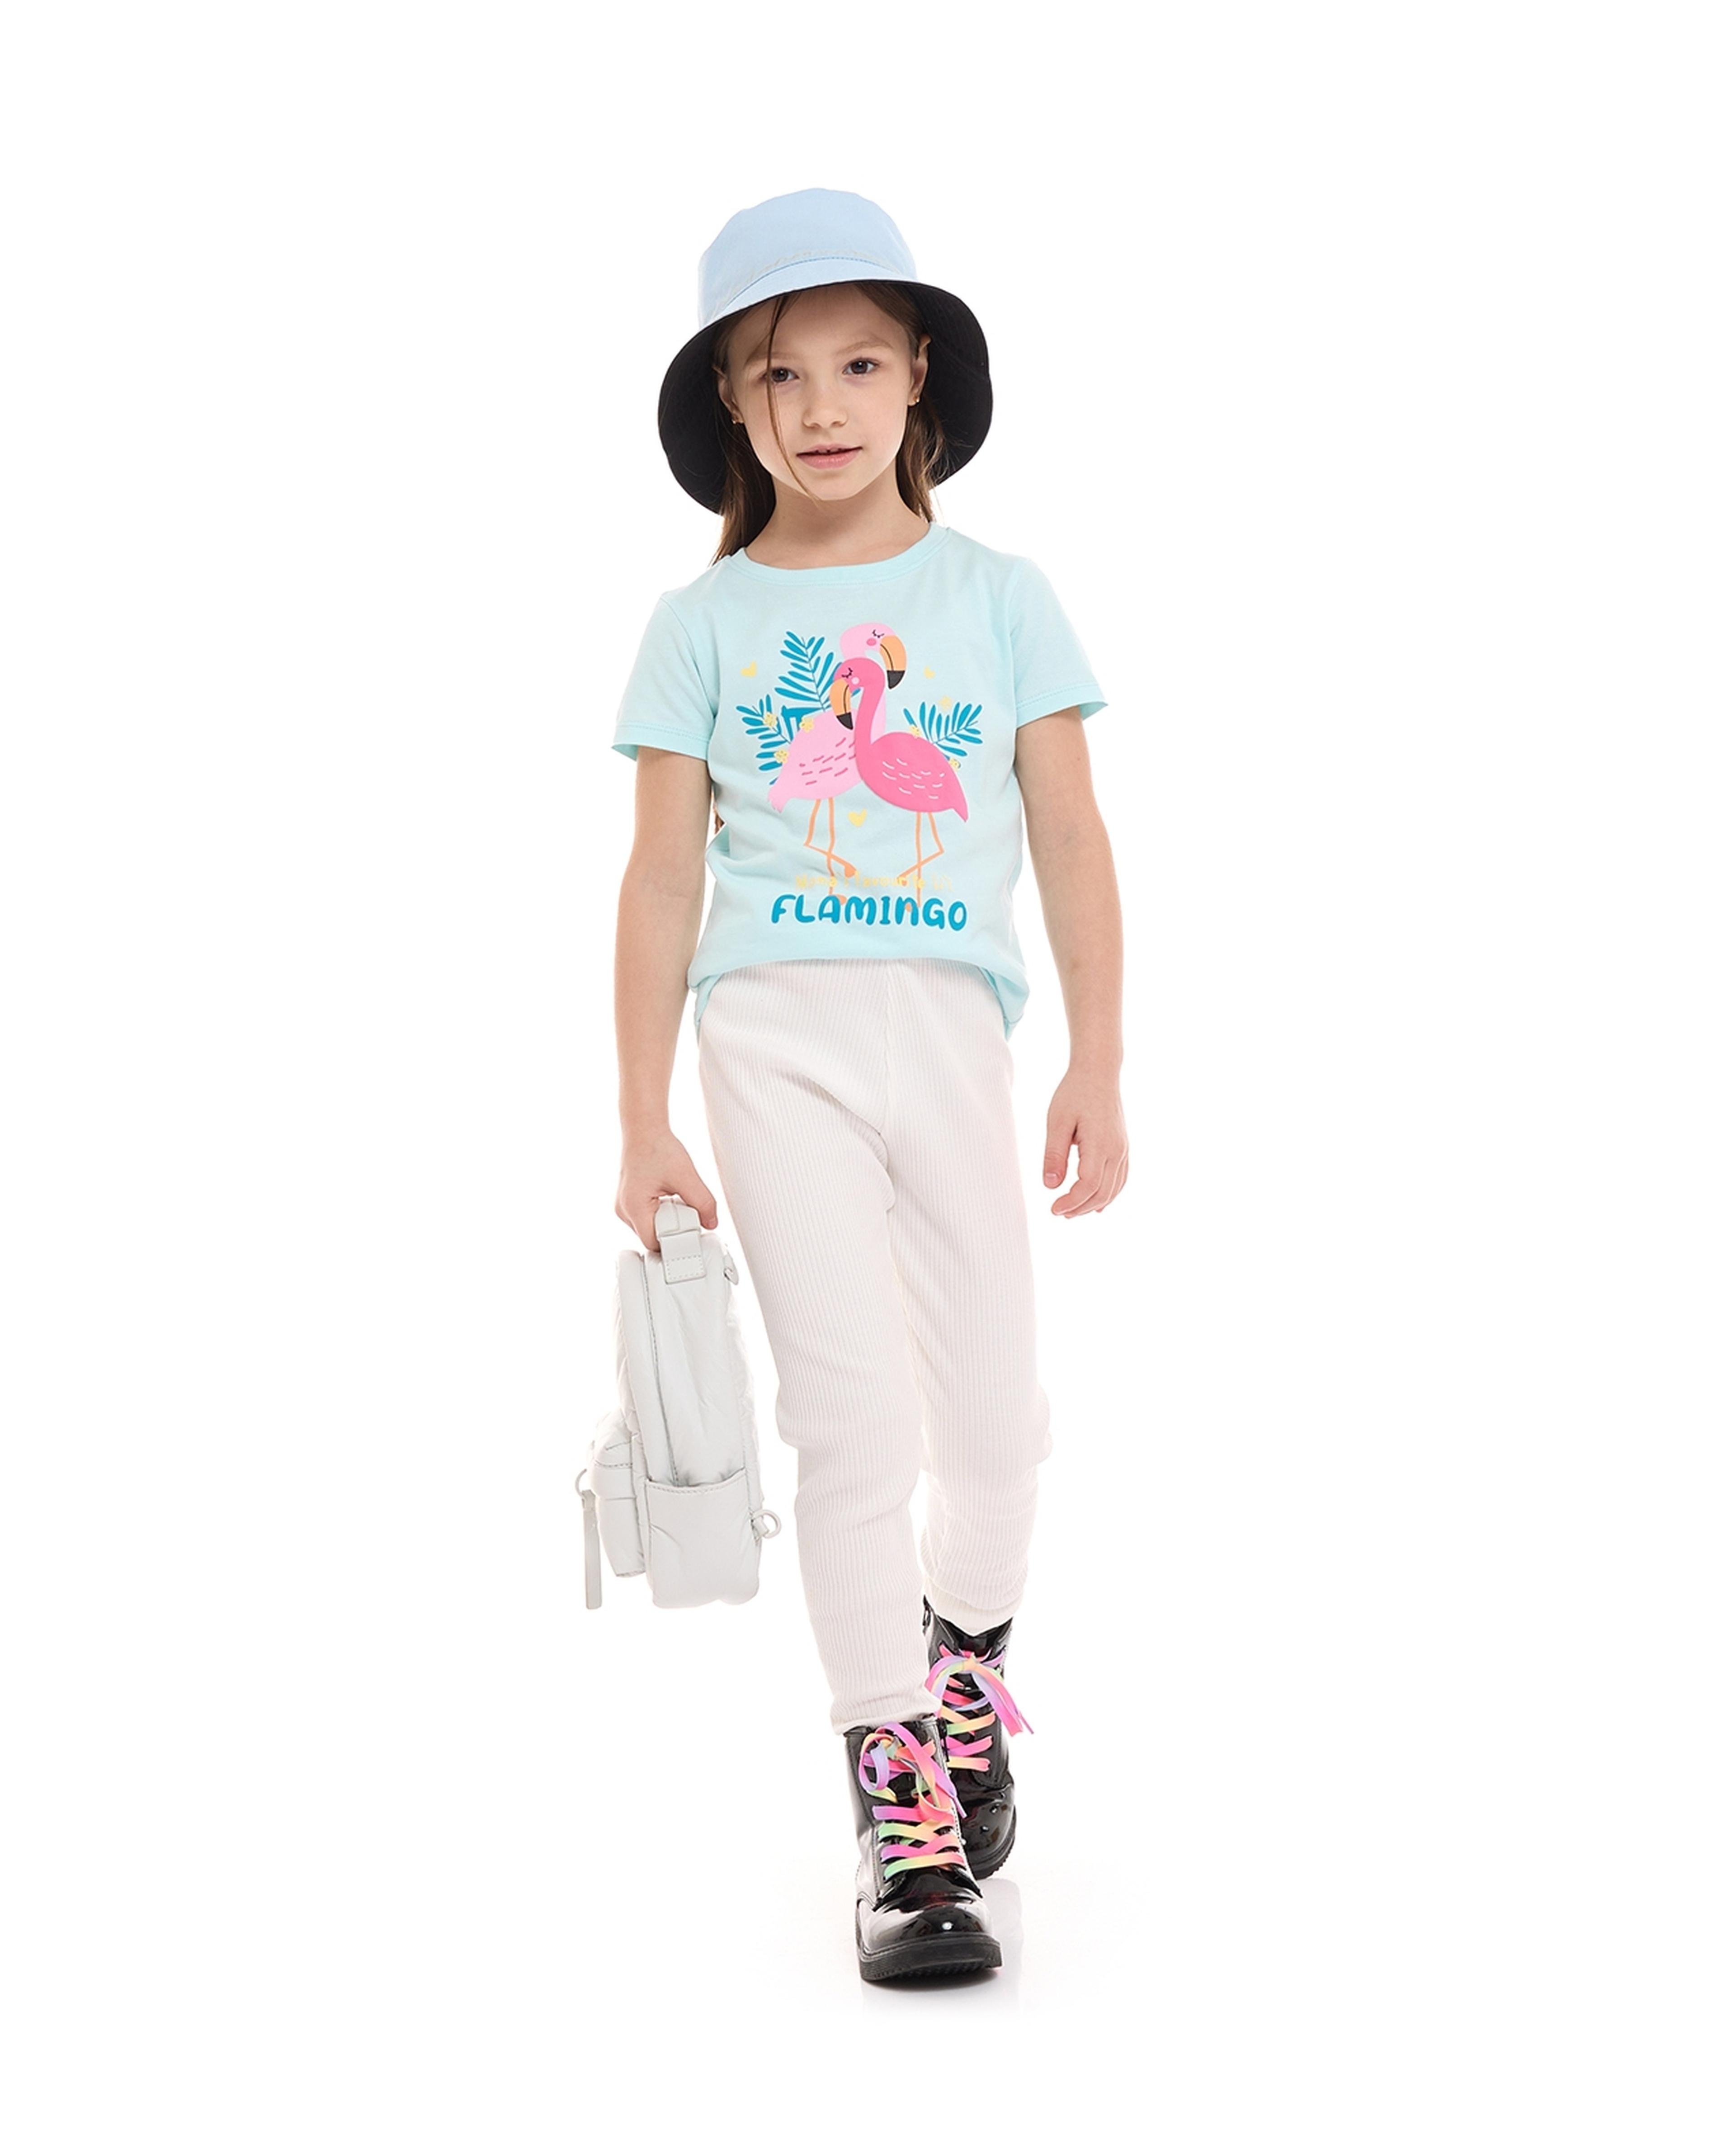 Flamingo Print T-Shirt with Crew Neck and Short Sleeves